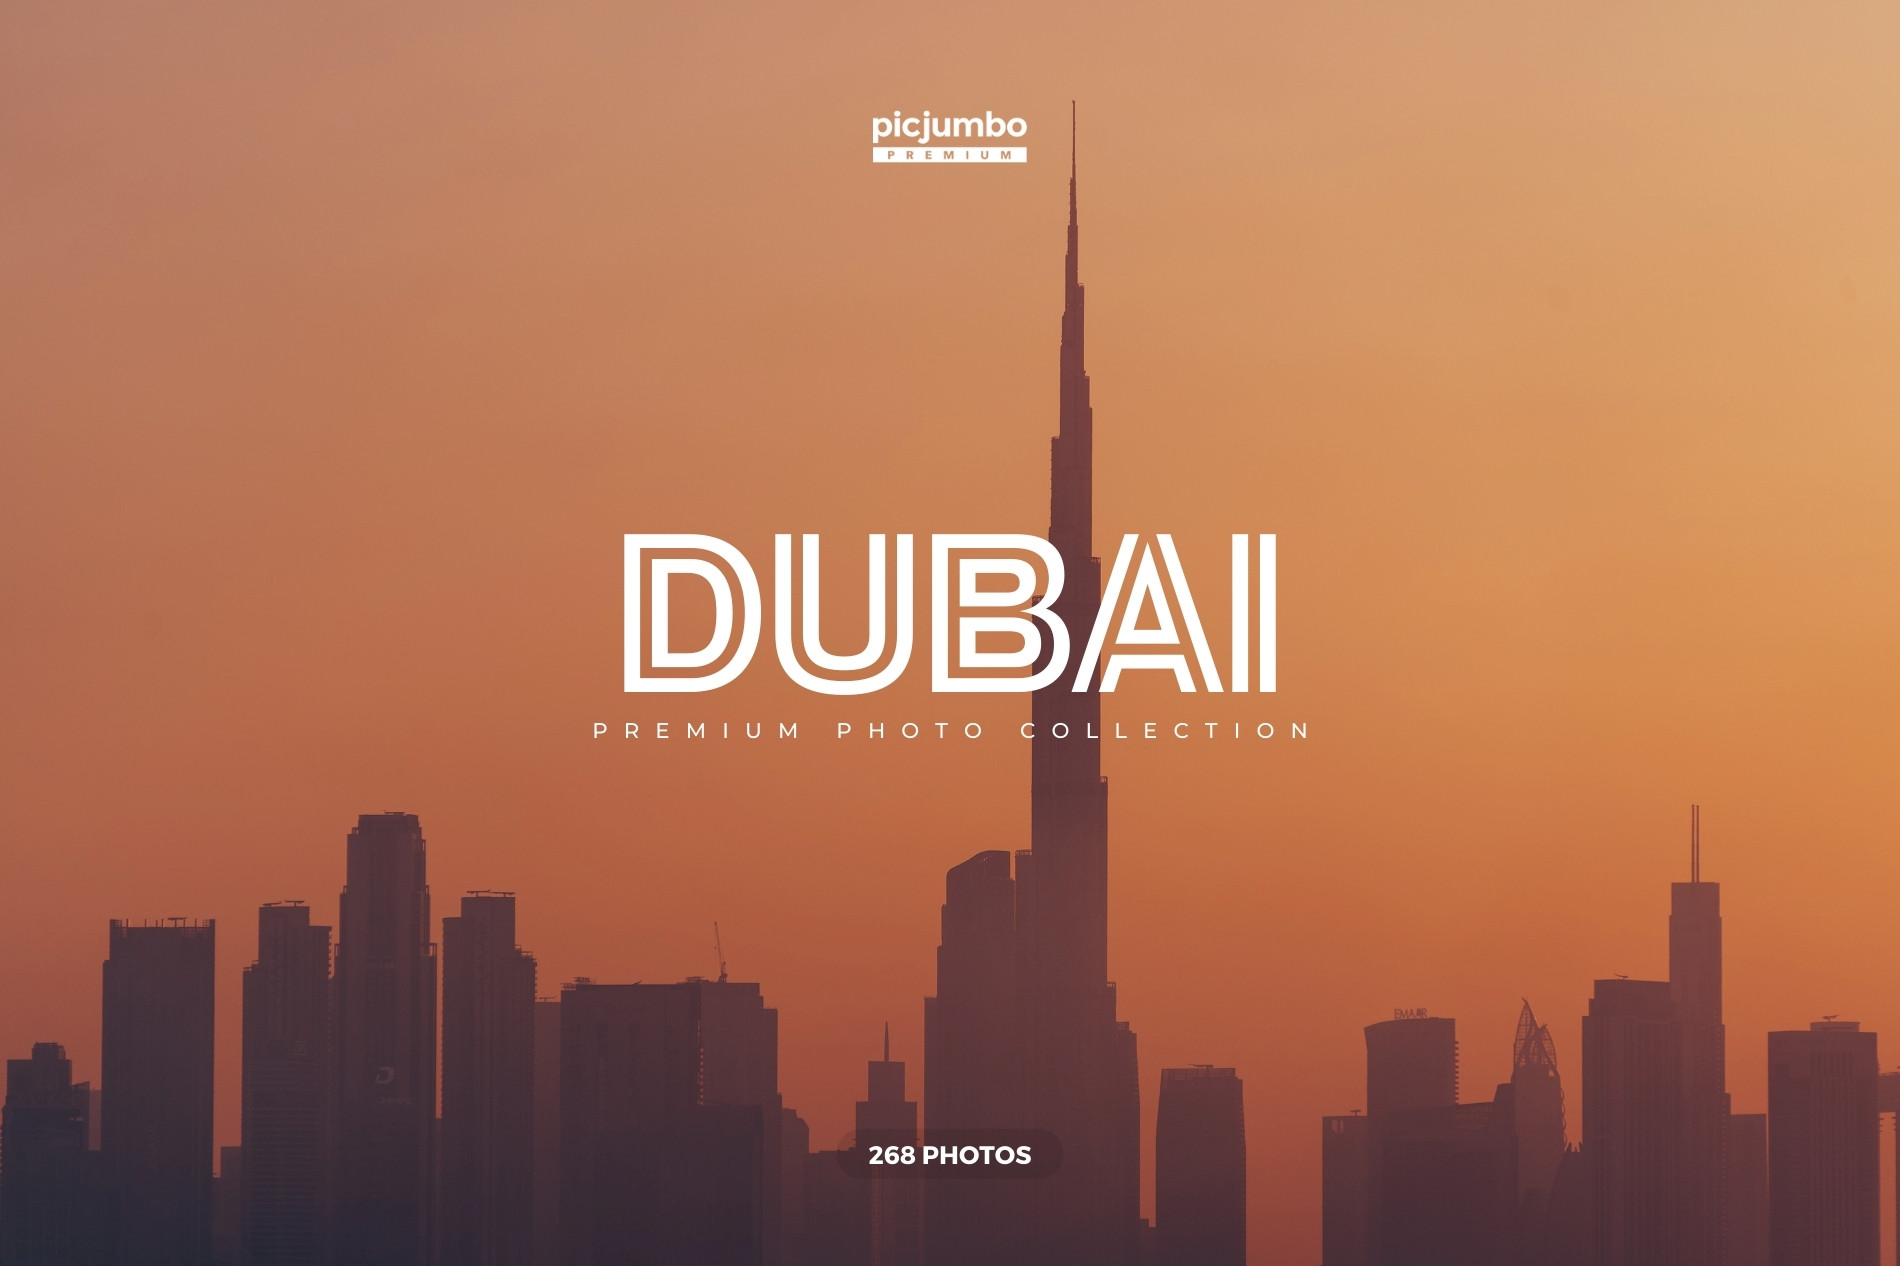 Download hi-res stock photos from our Dubai PREMIUM Collection!